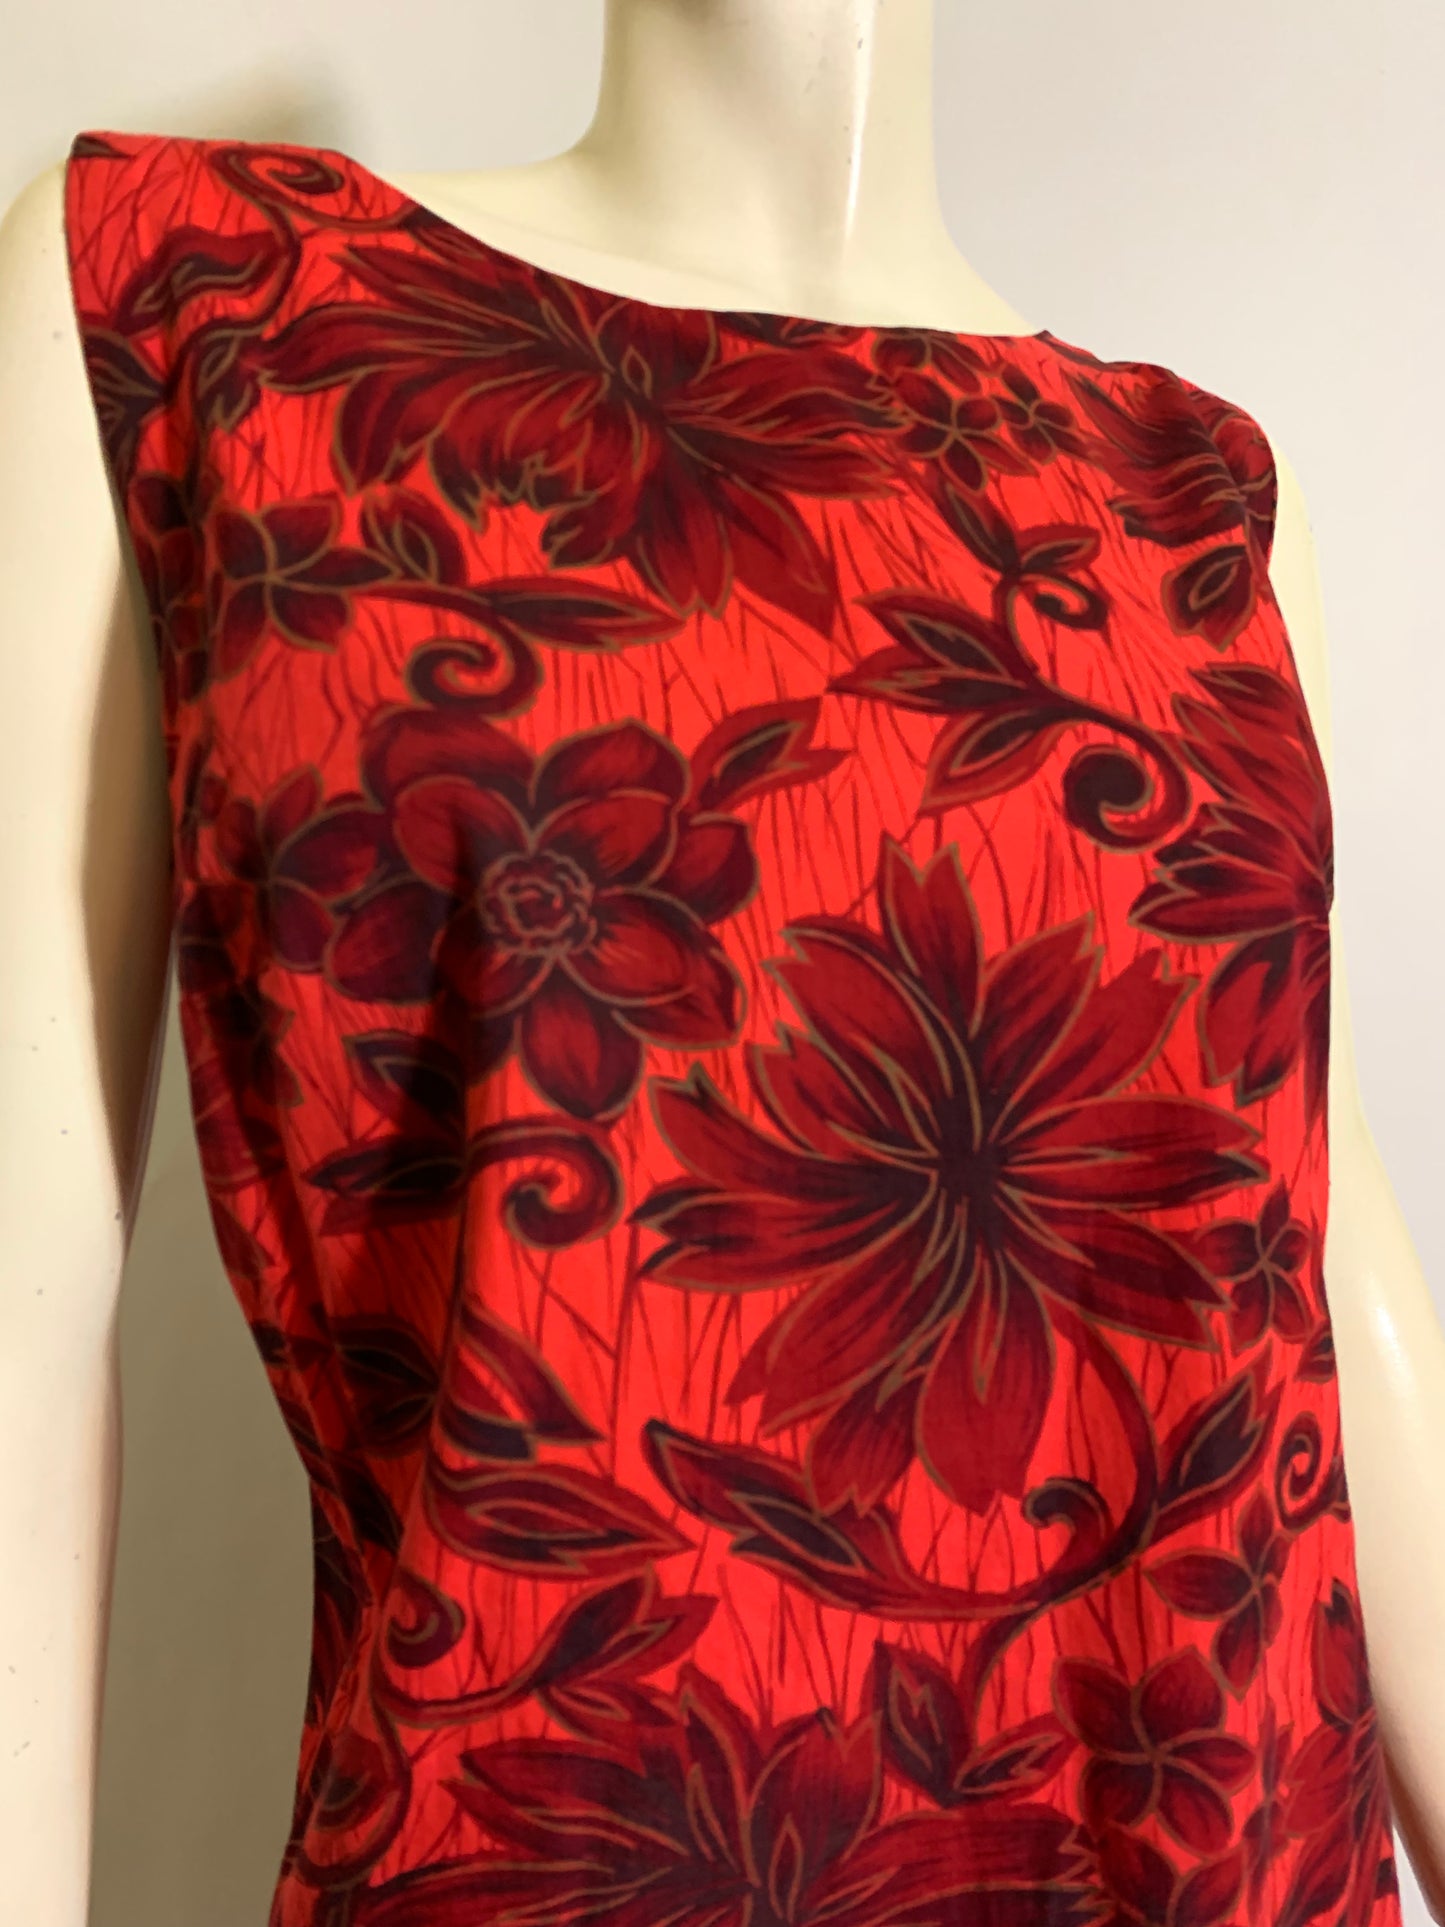 Bold Tropical Floral Print Black and Red Cotton Shift Dress circa 1960s